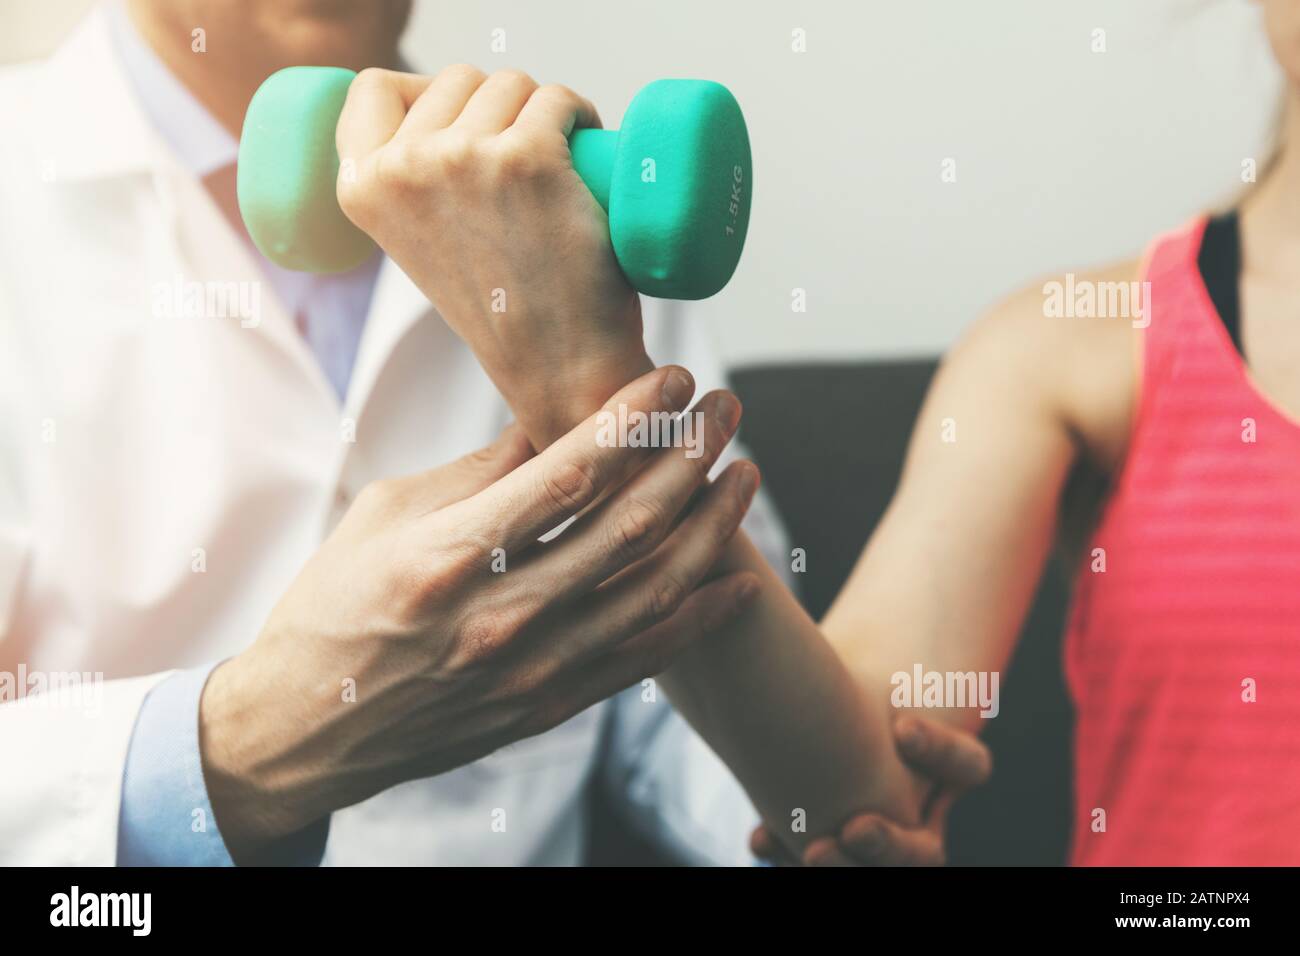 physiotherapy - physiotherapist help woman patient to recover from hand injury at home. dumbbell exercises Stock Photo